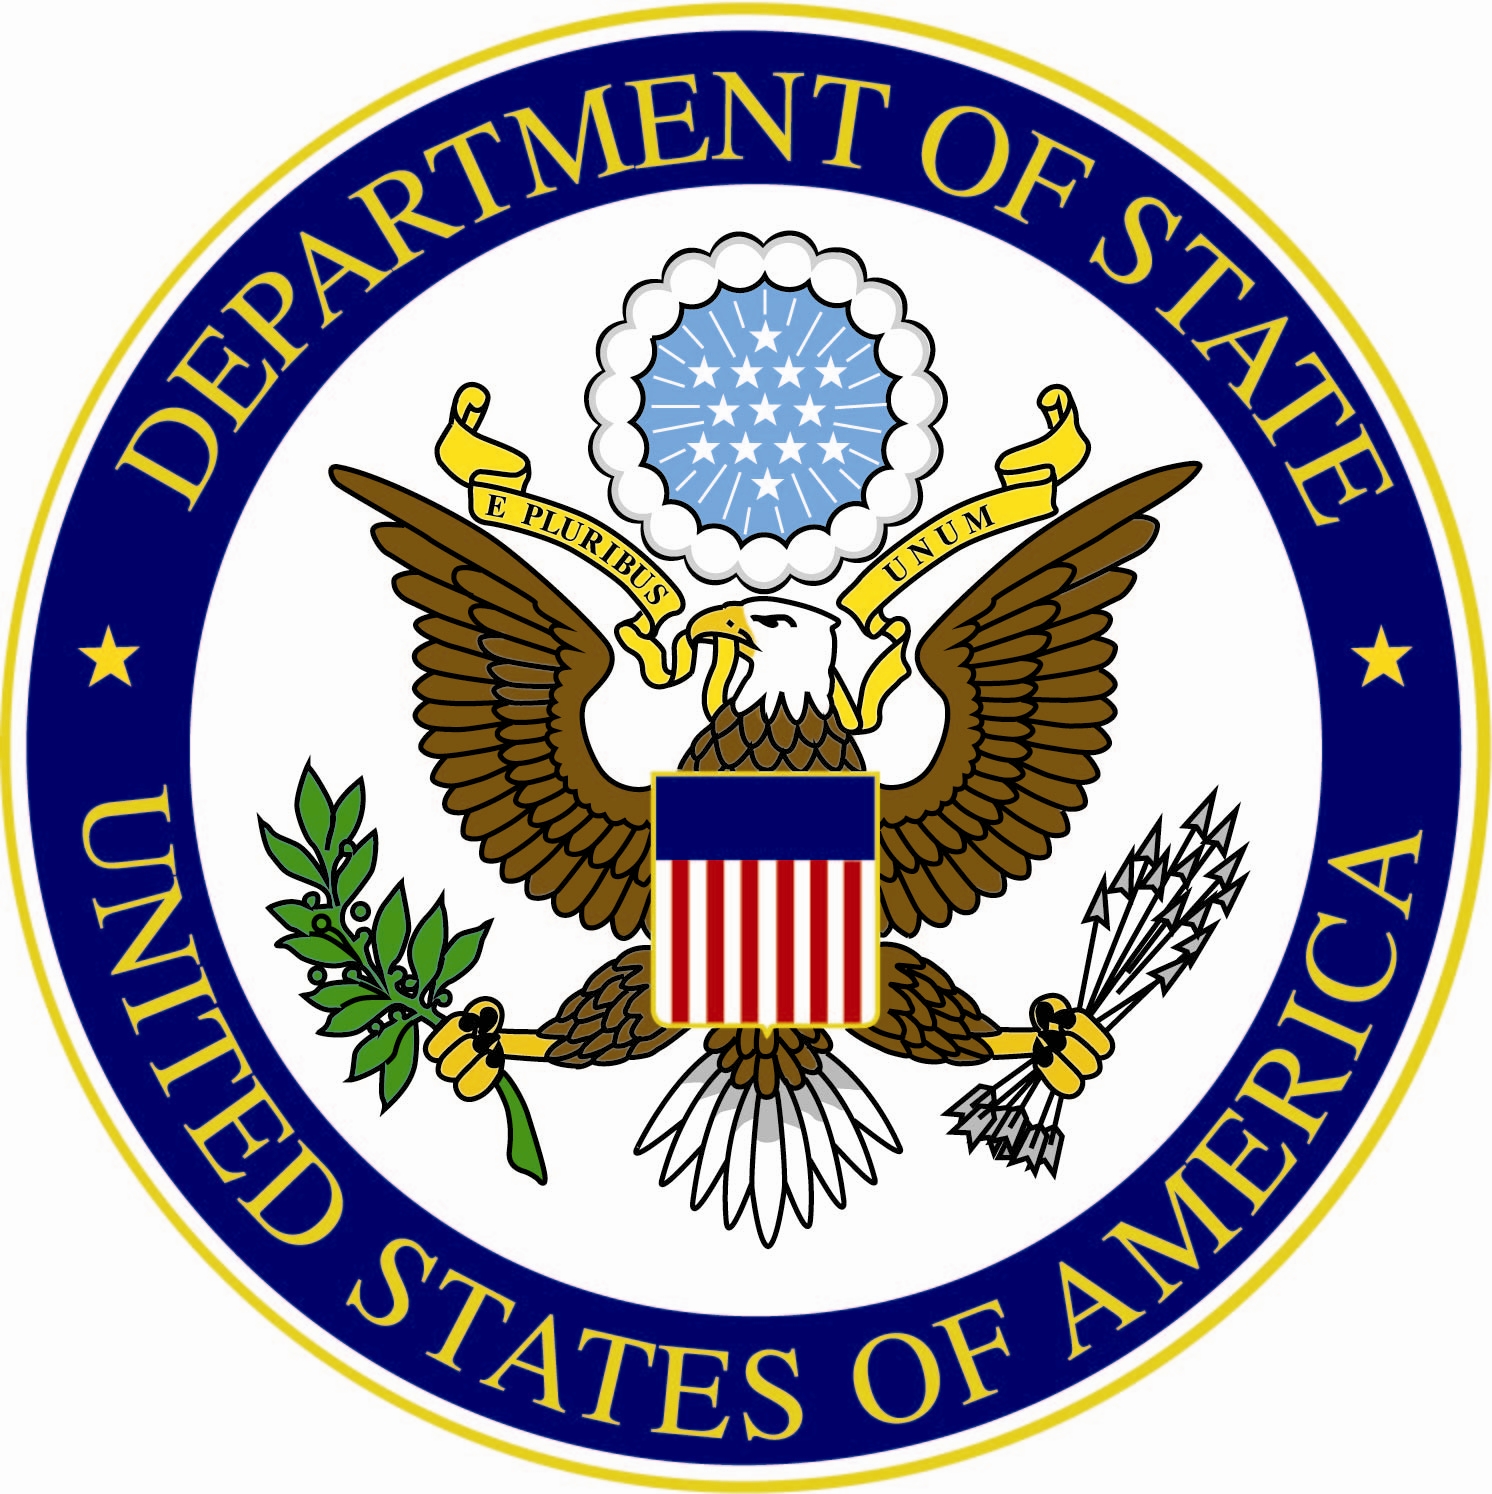 US State Department terms Pakistan 'critical counter-terrorism partner'; says terrorism reduced in Pakistan after Zarb-e-Azb